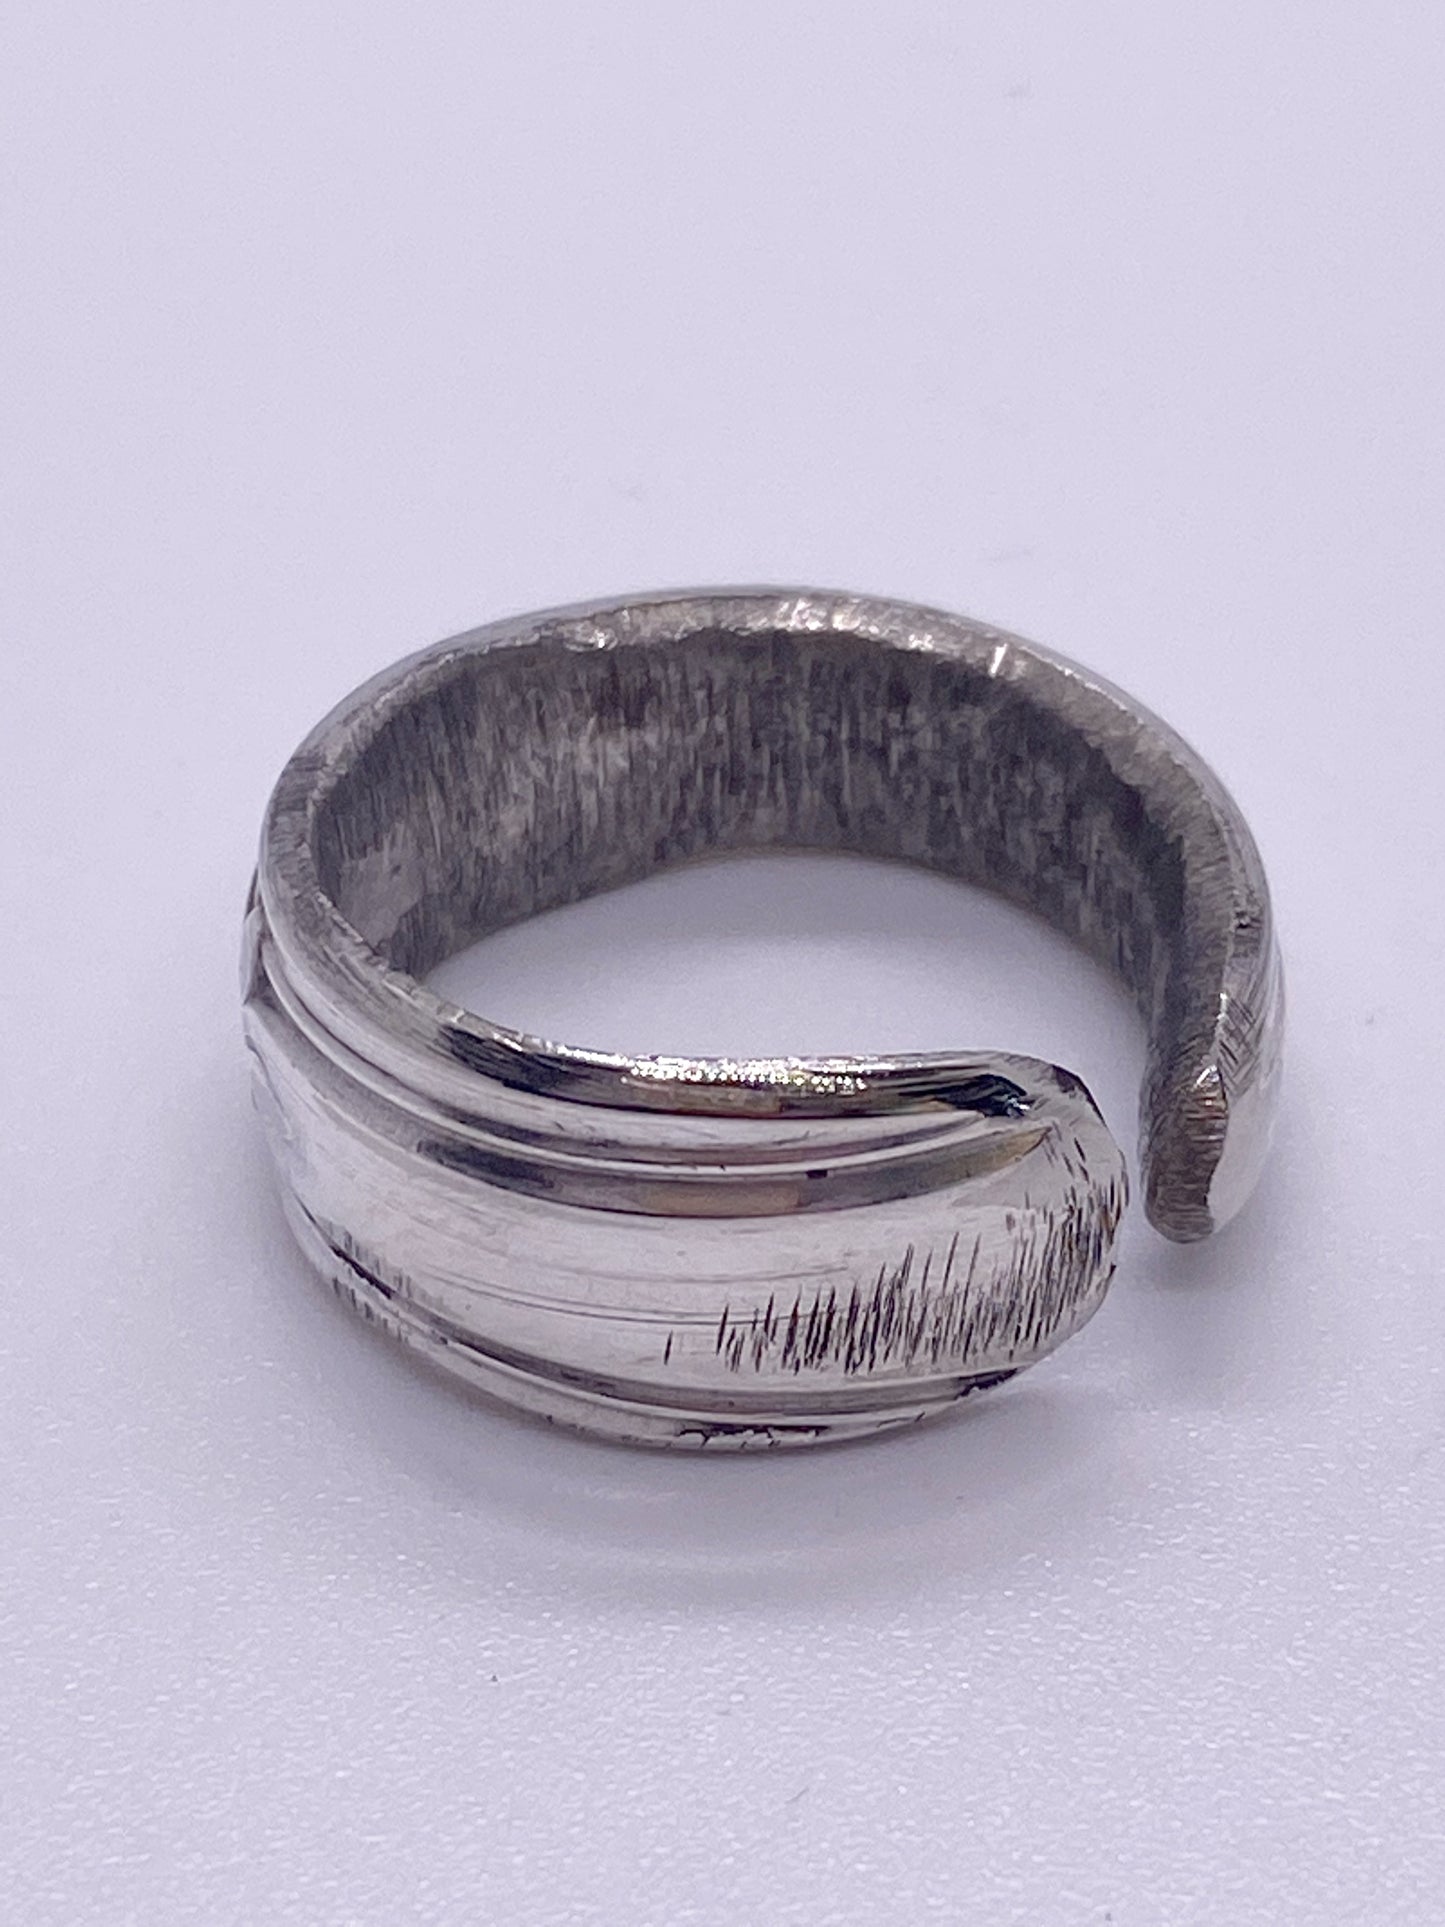 Spoon Ring size: 6 3/4